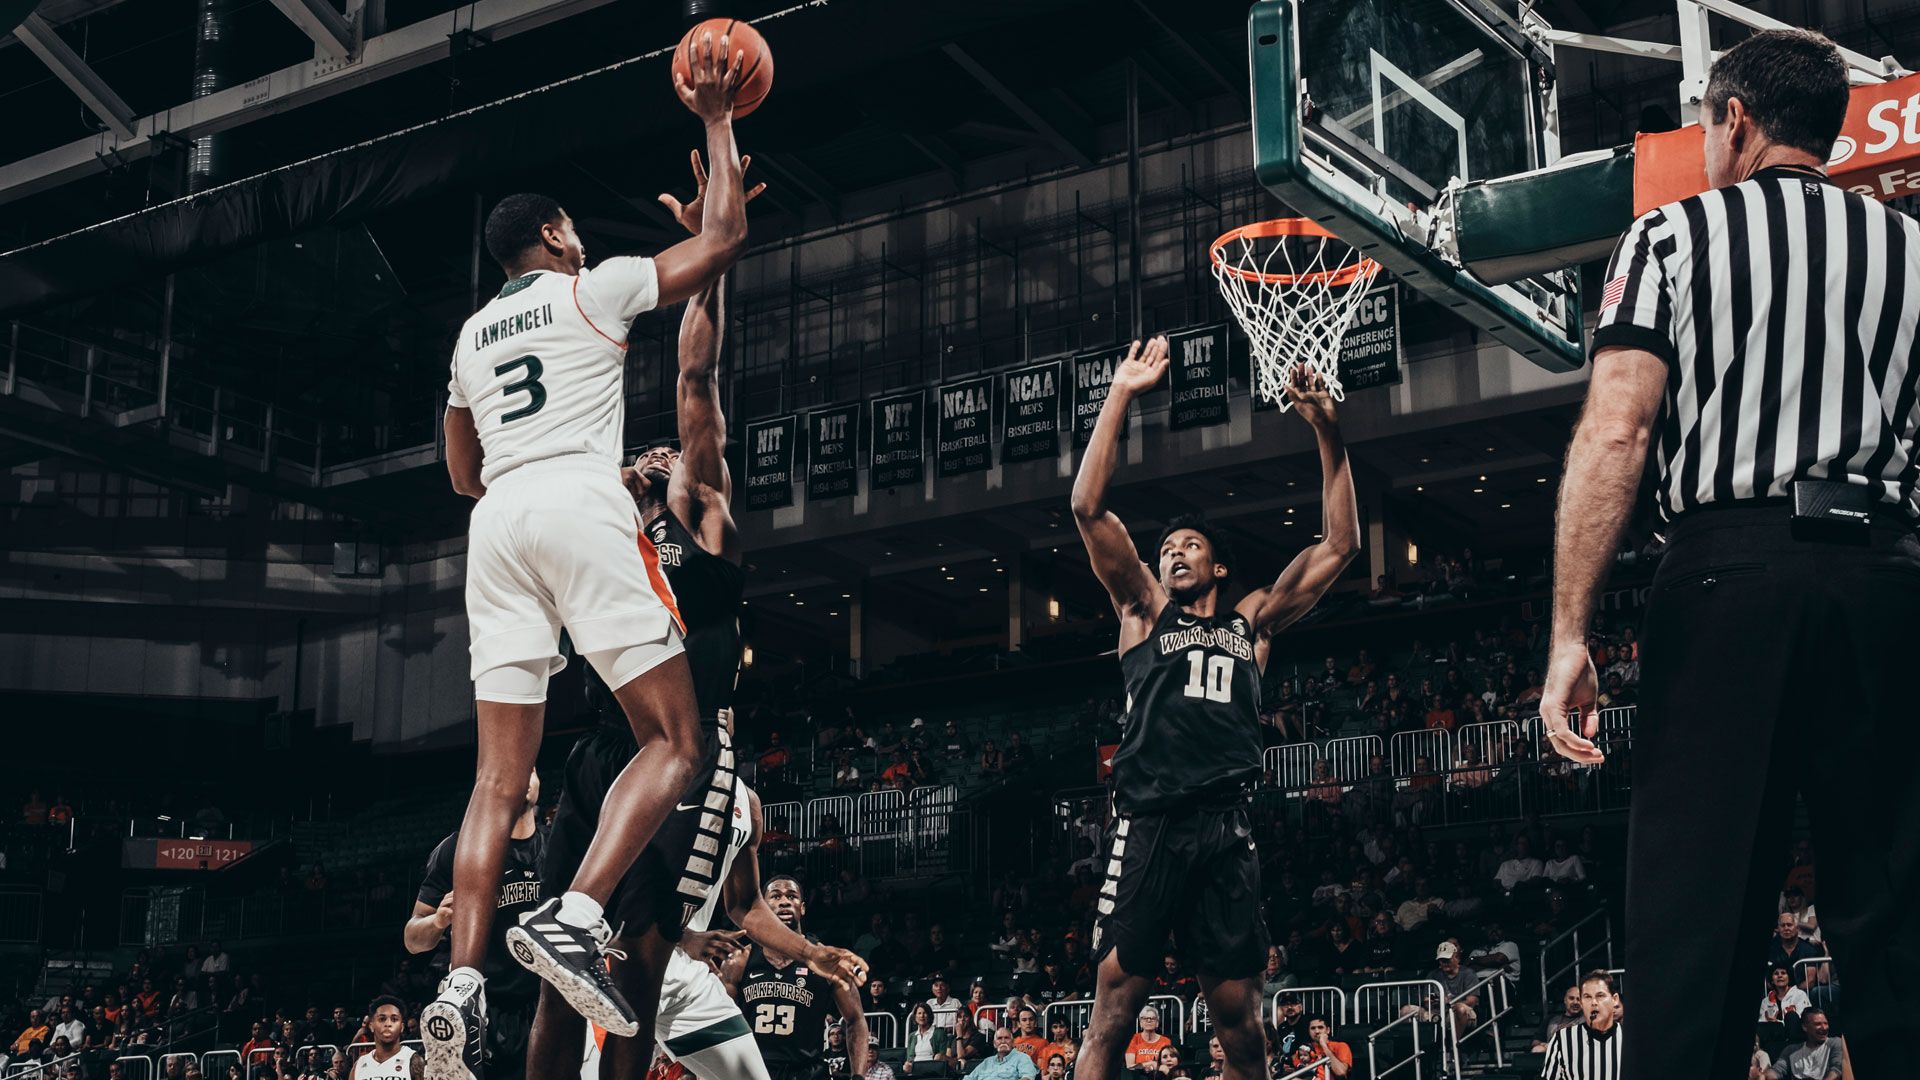 Canes Take Down Wake Forest, 76-65